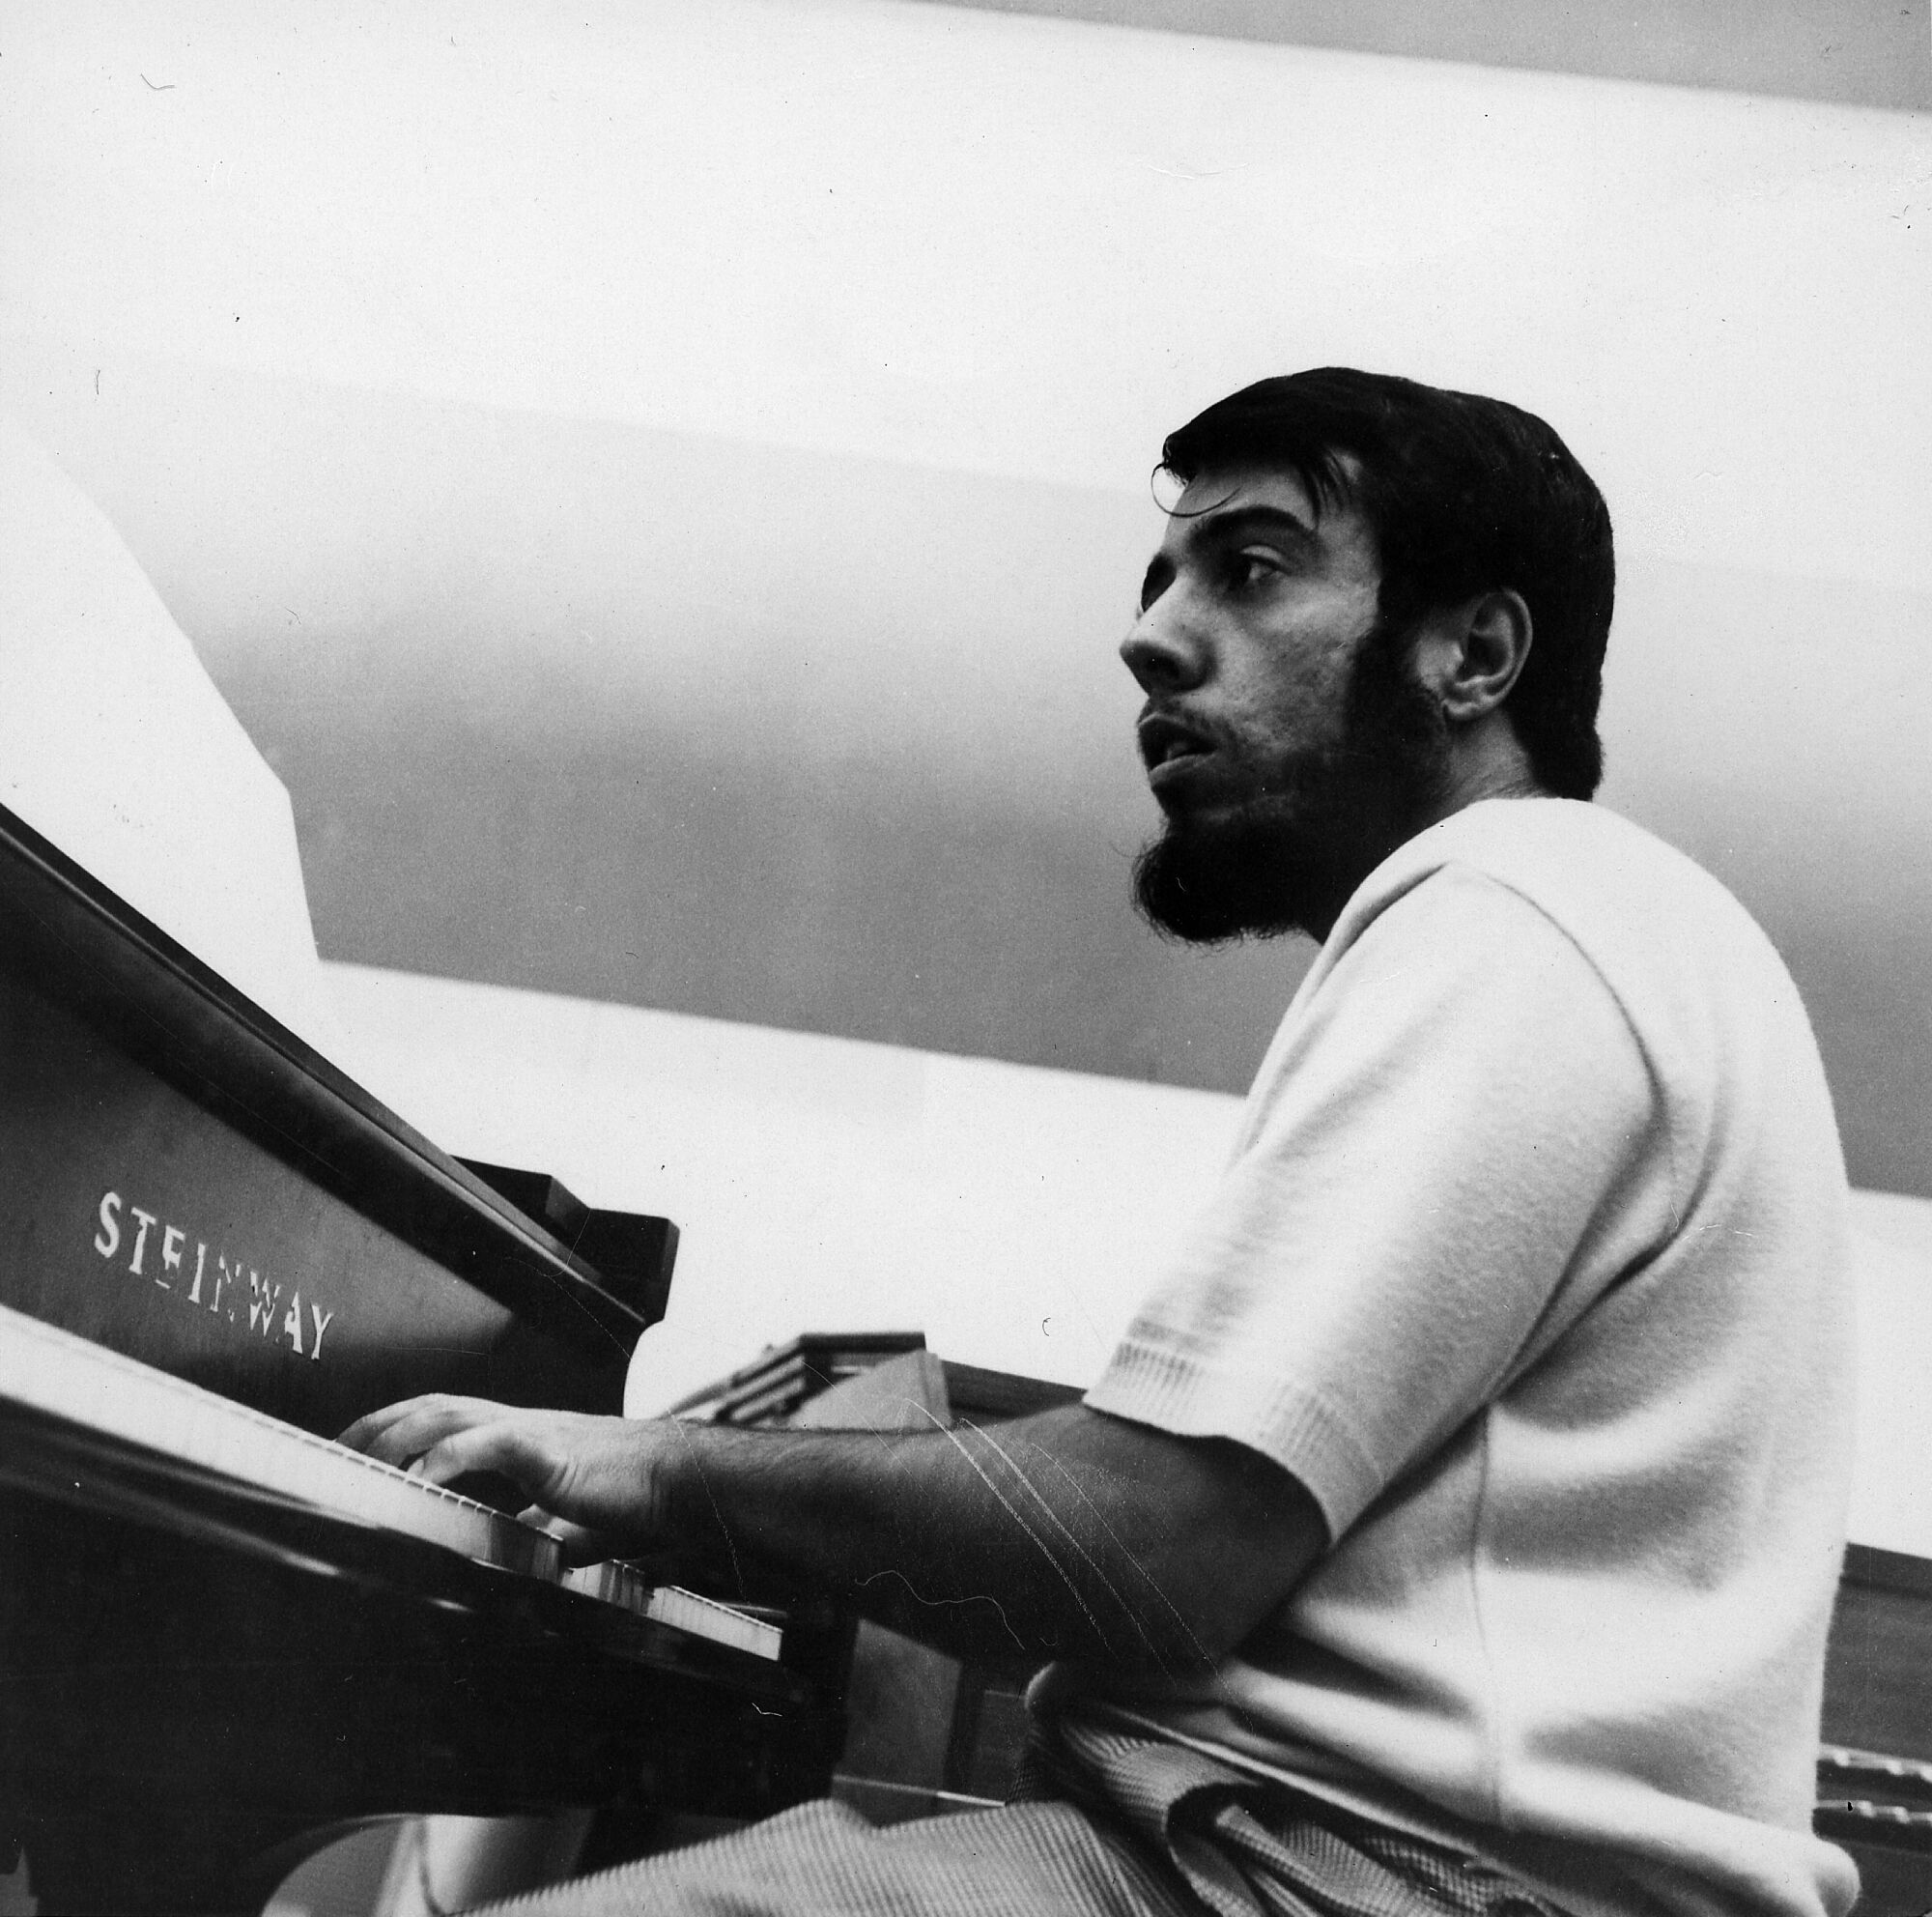 UNSPECIFIED - CIRCA 1970: Photo of Sergio Mendes Photo by Michael Ochs Archives/Getty Images